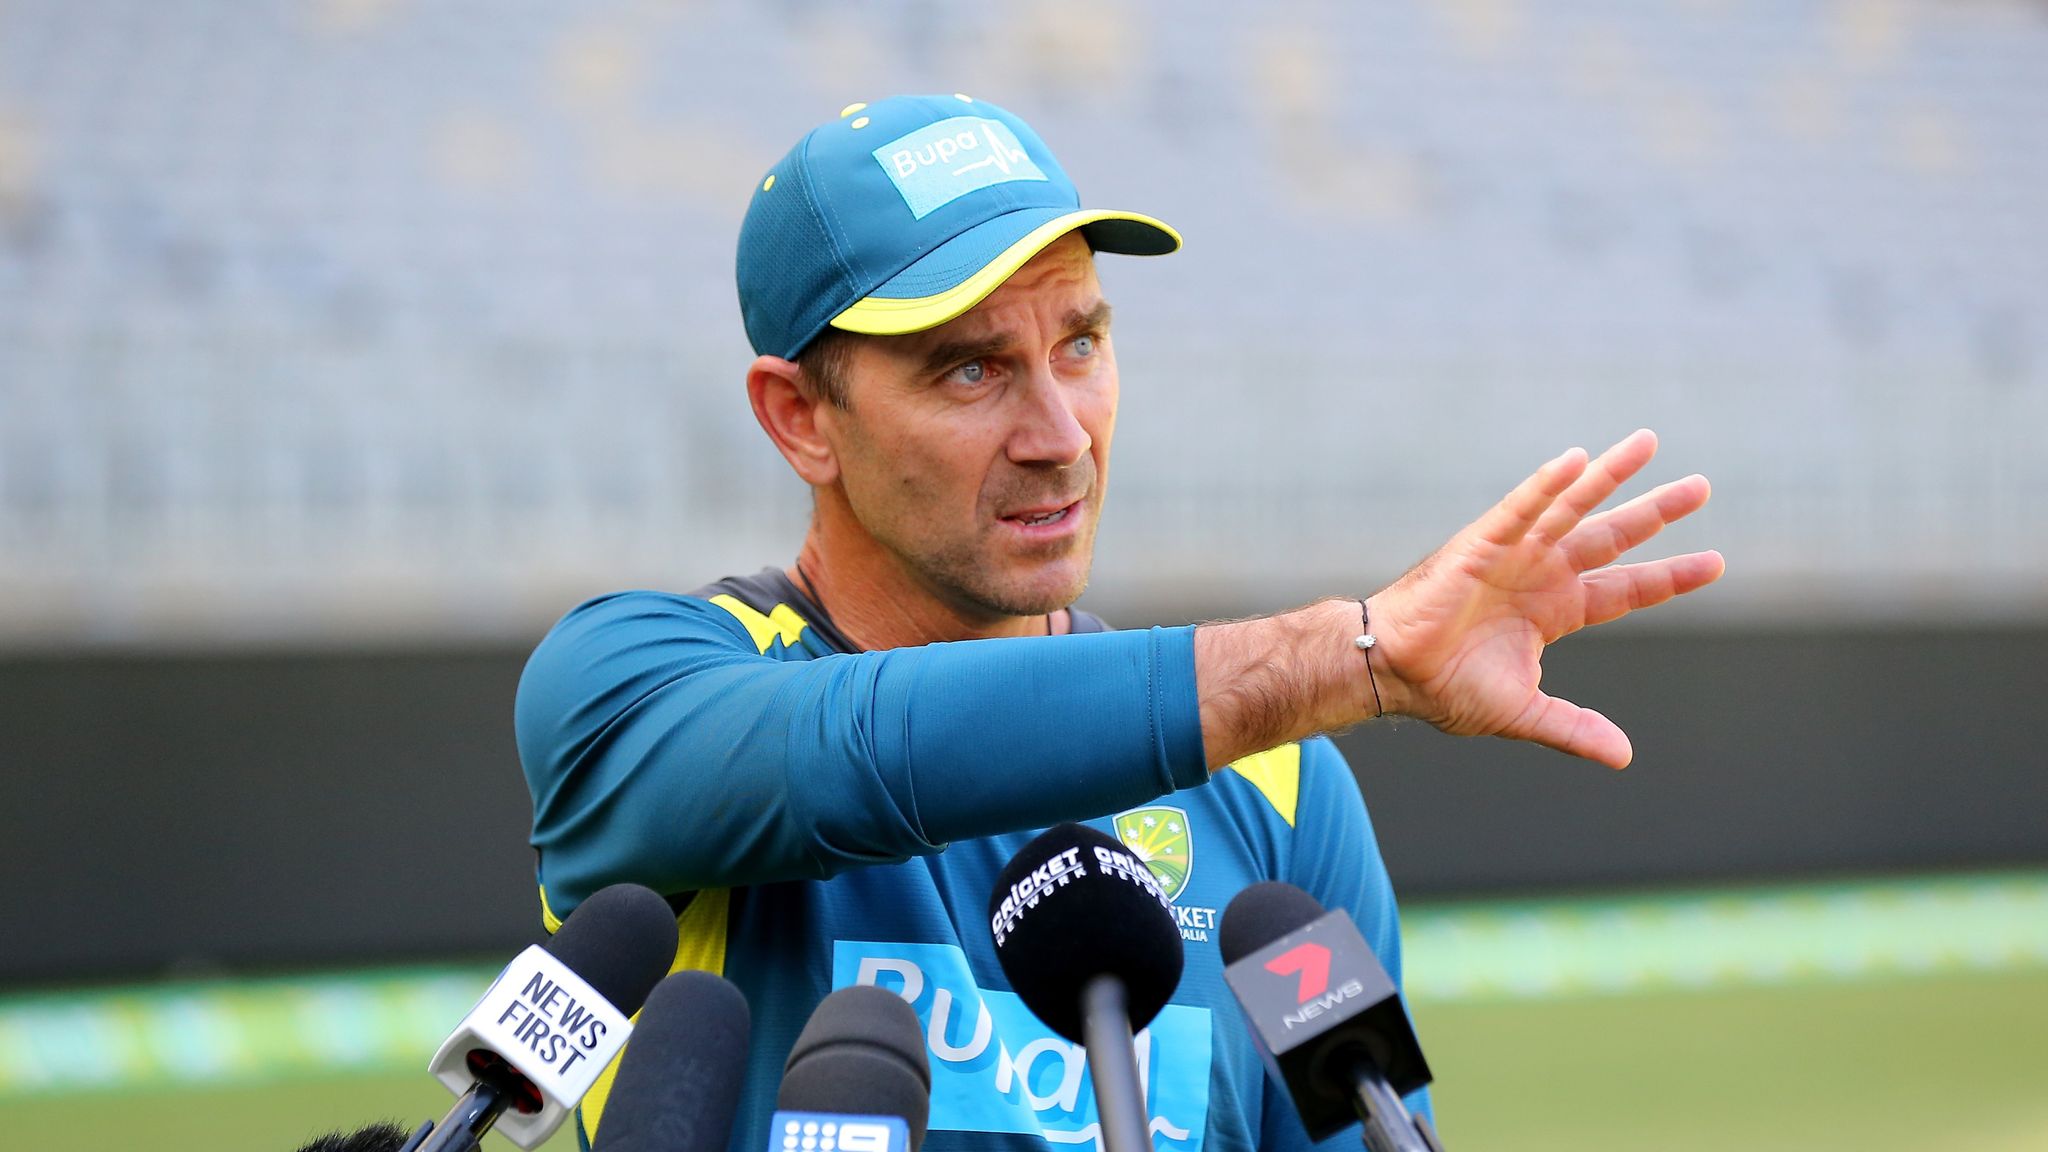 justin langer reacts to steve smith captaincy ambition